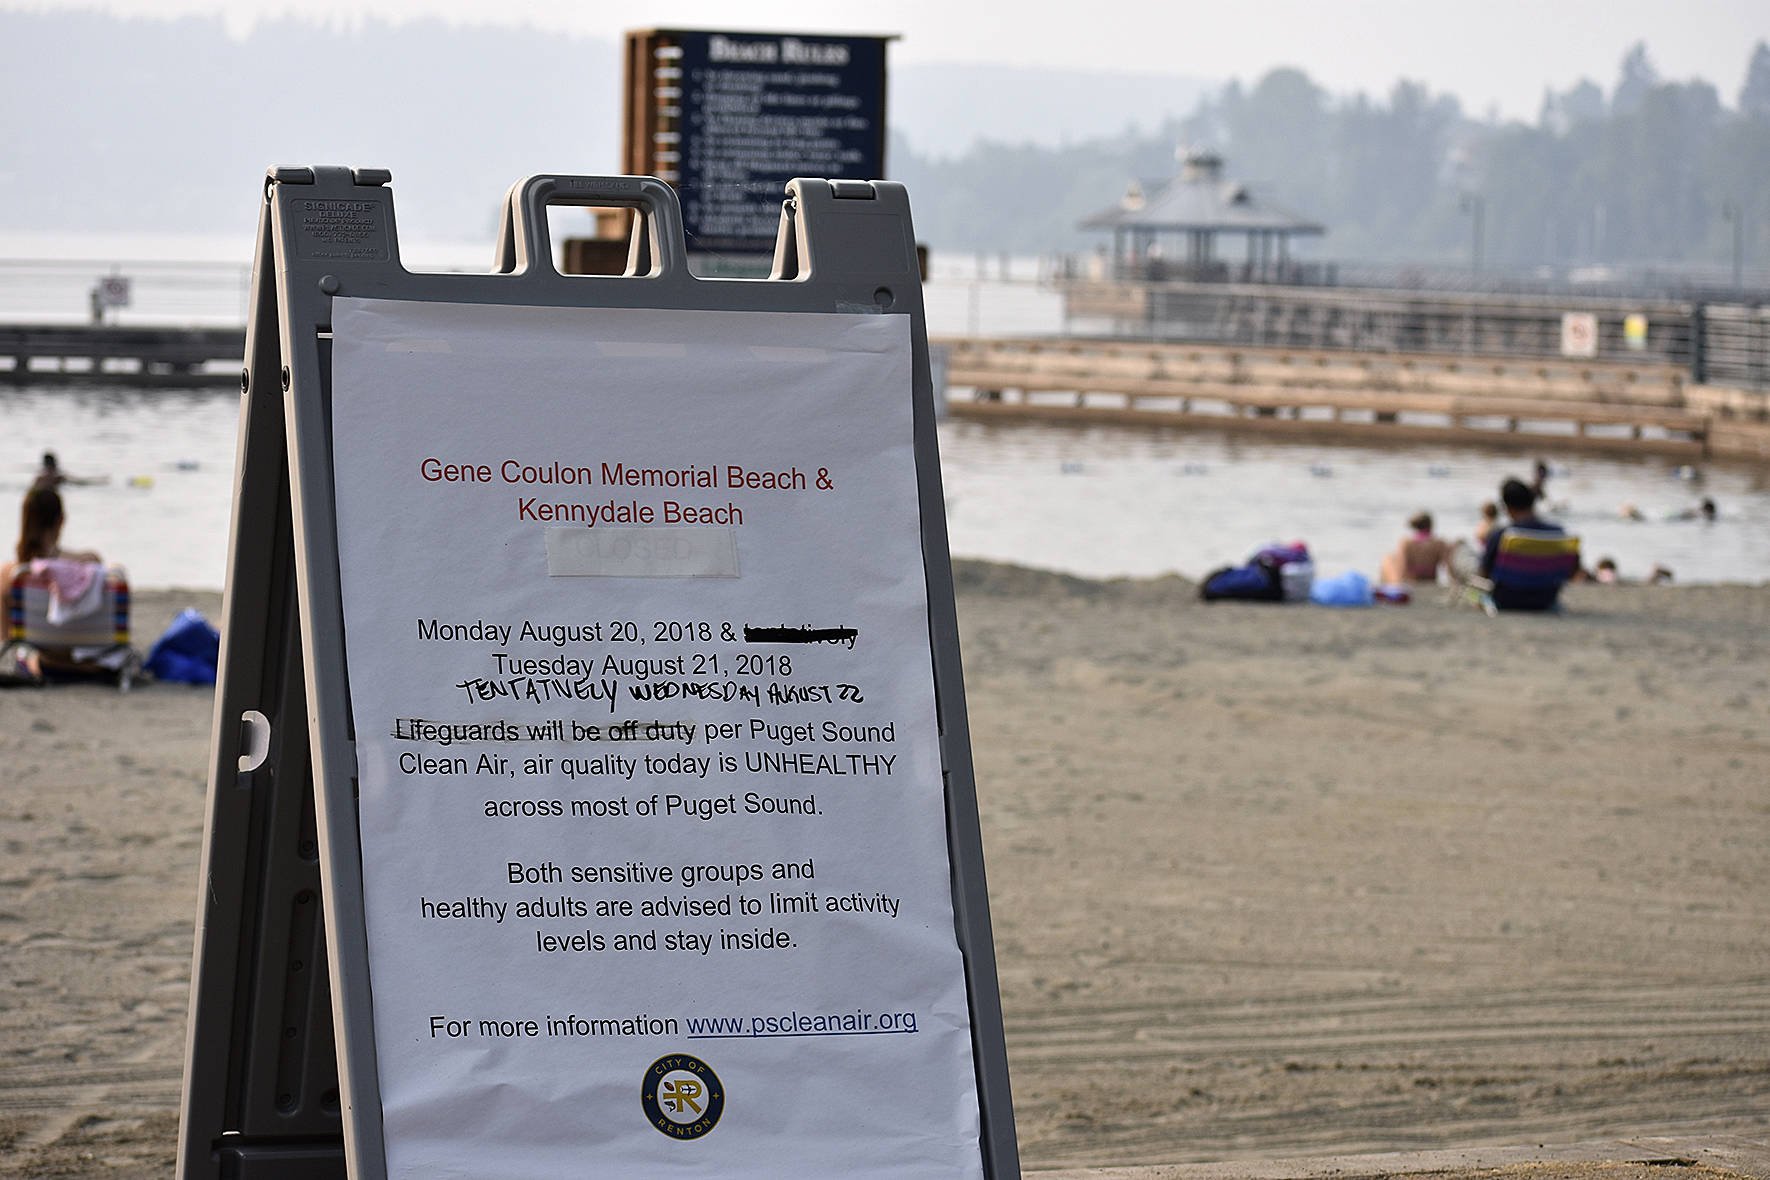 Beachgoers still flocked to Gene Coulon Memorial Park Aug. 22 despite the unhealthy air quality rating the city of Renton saw most of last week. Photo by Haley Ausbun.